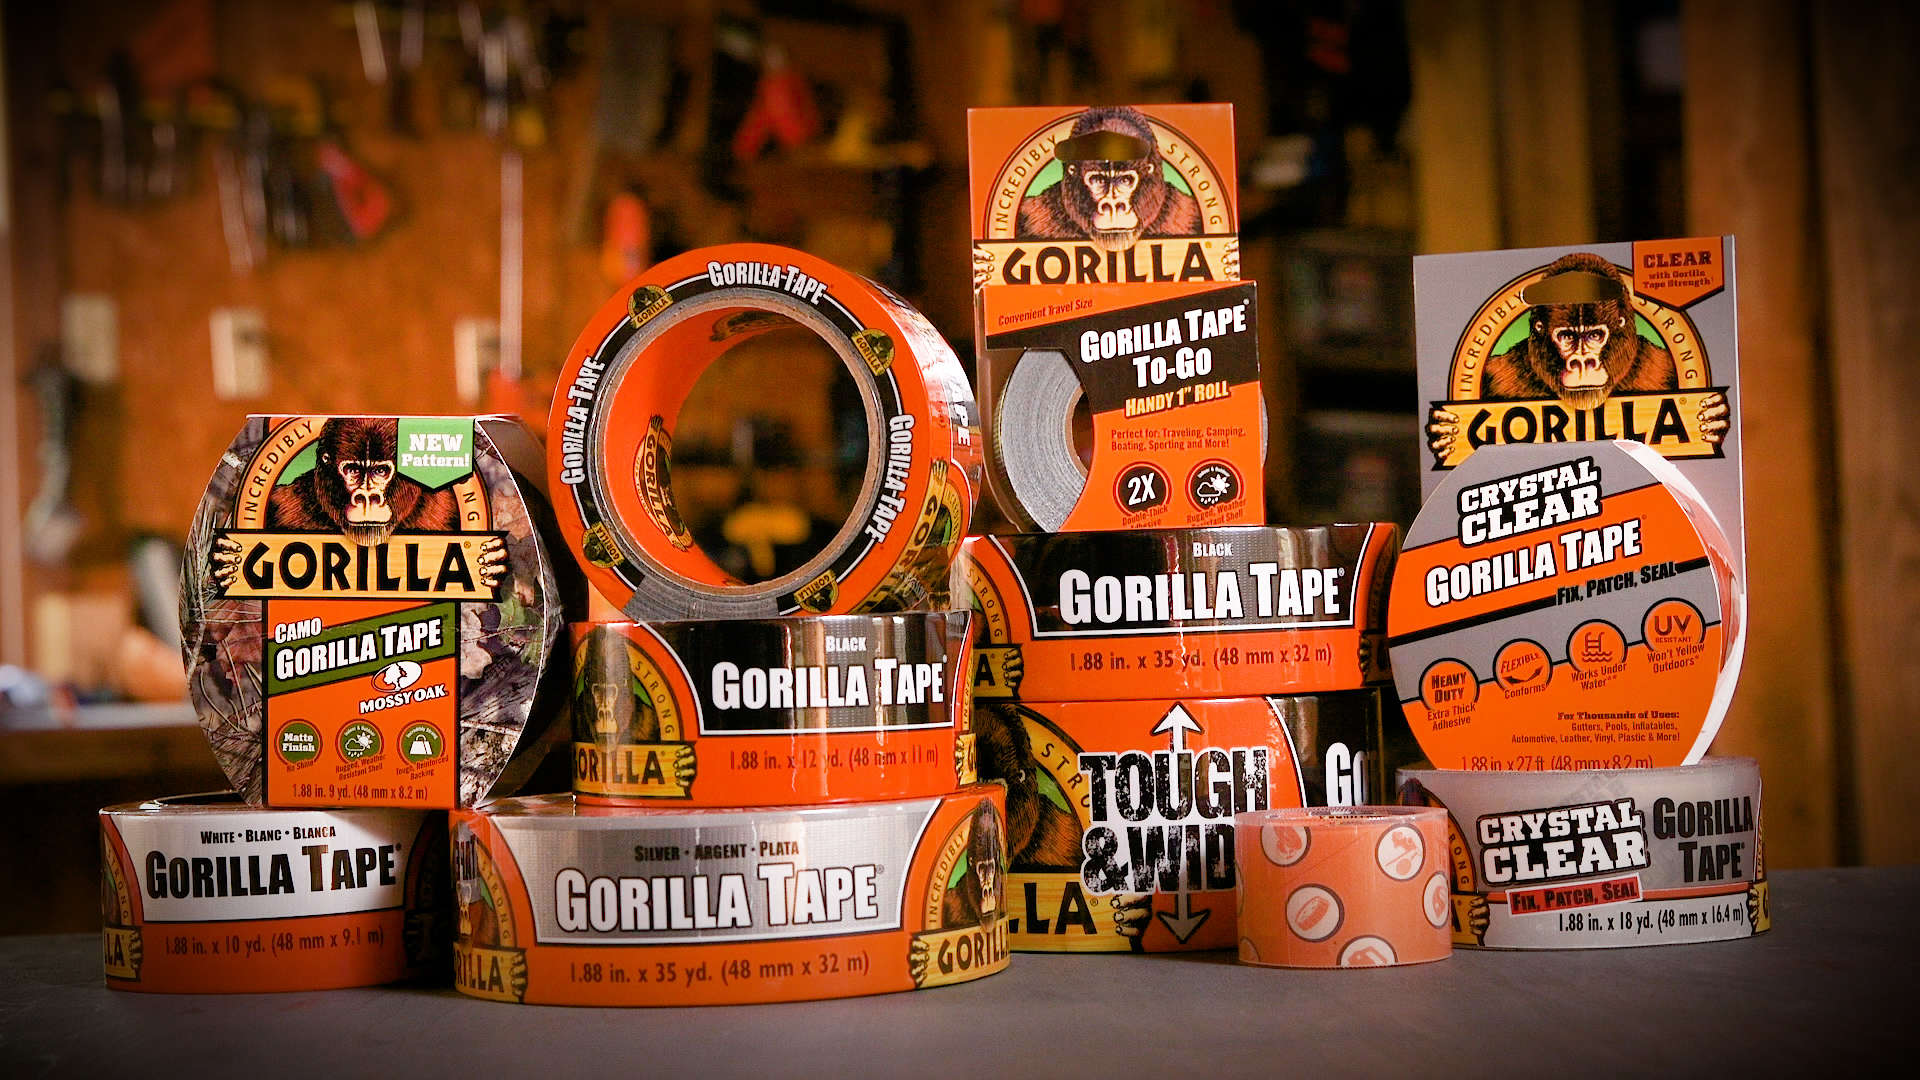 The Gorilla Glue Company - Gorilla Double-Sided Tape sticks to smooth and  rough surfaces including carpet, rugs, flooring, wood, stone, brick, metal,  vinyl, plastic, paper, and more. #gorillaglue #gorillatape #doublesided  #doublesidedtape #diy #